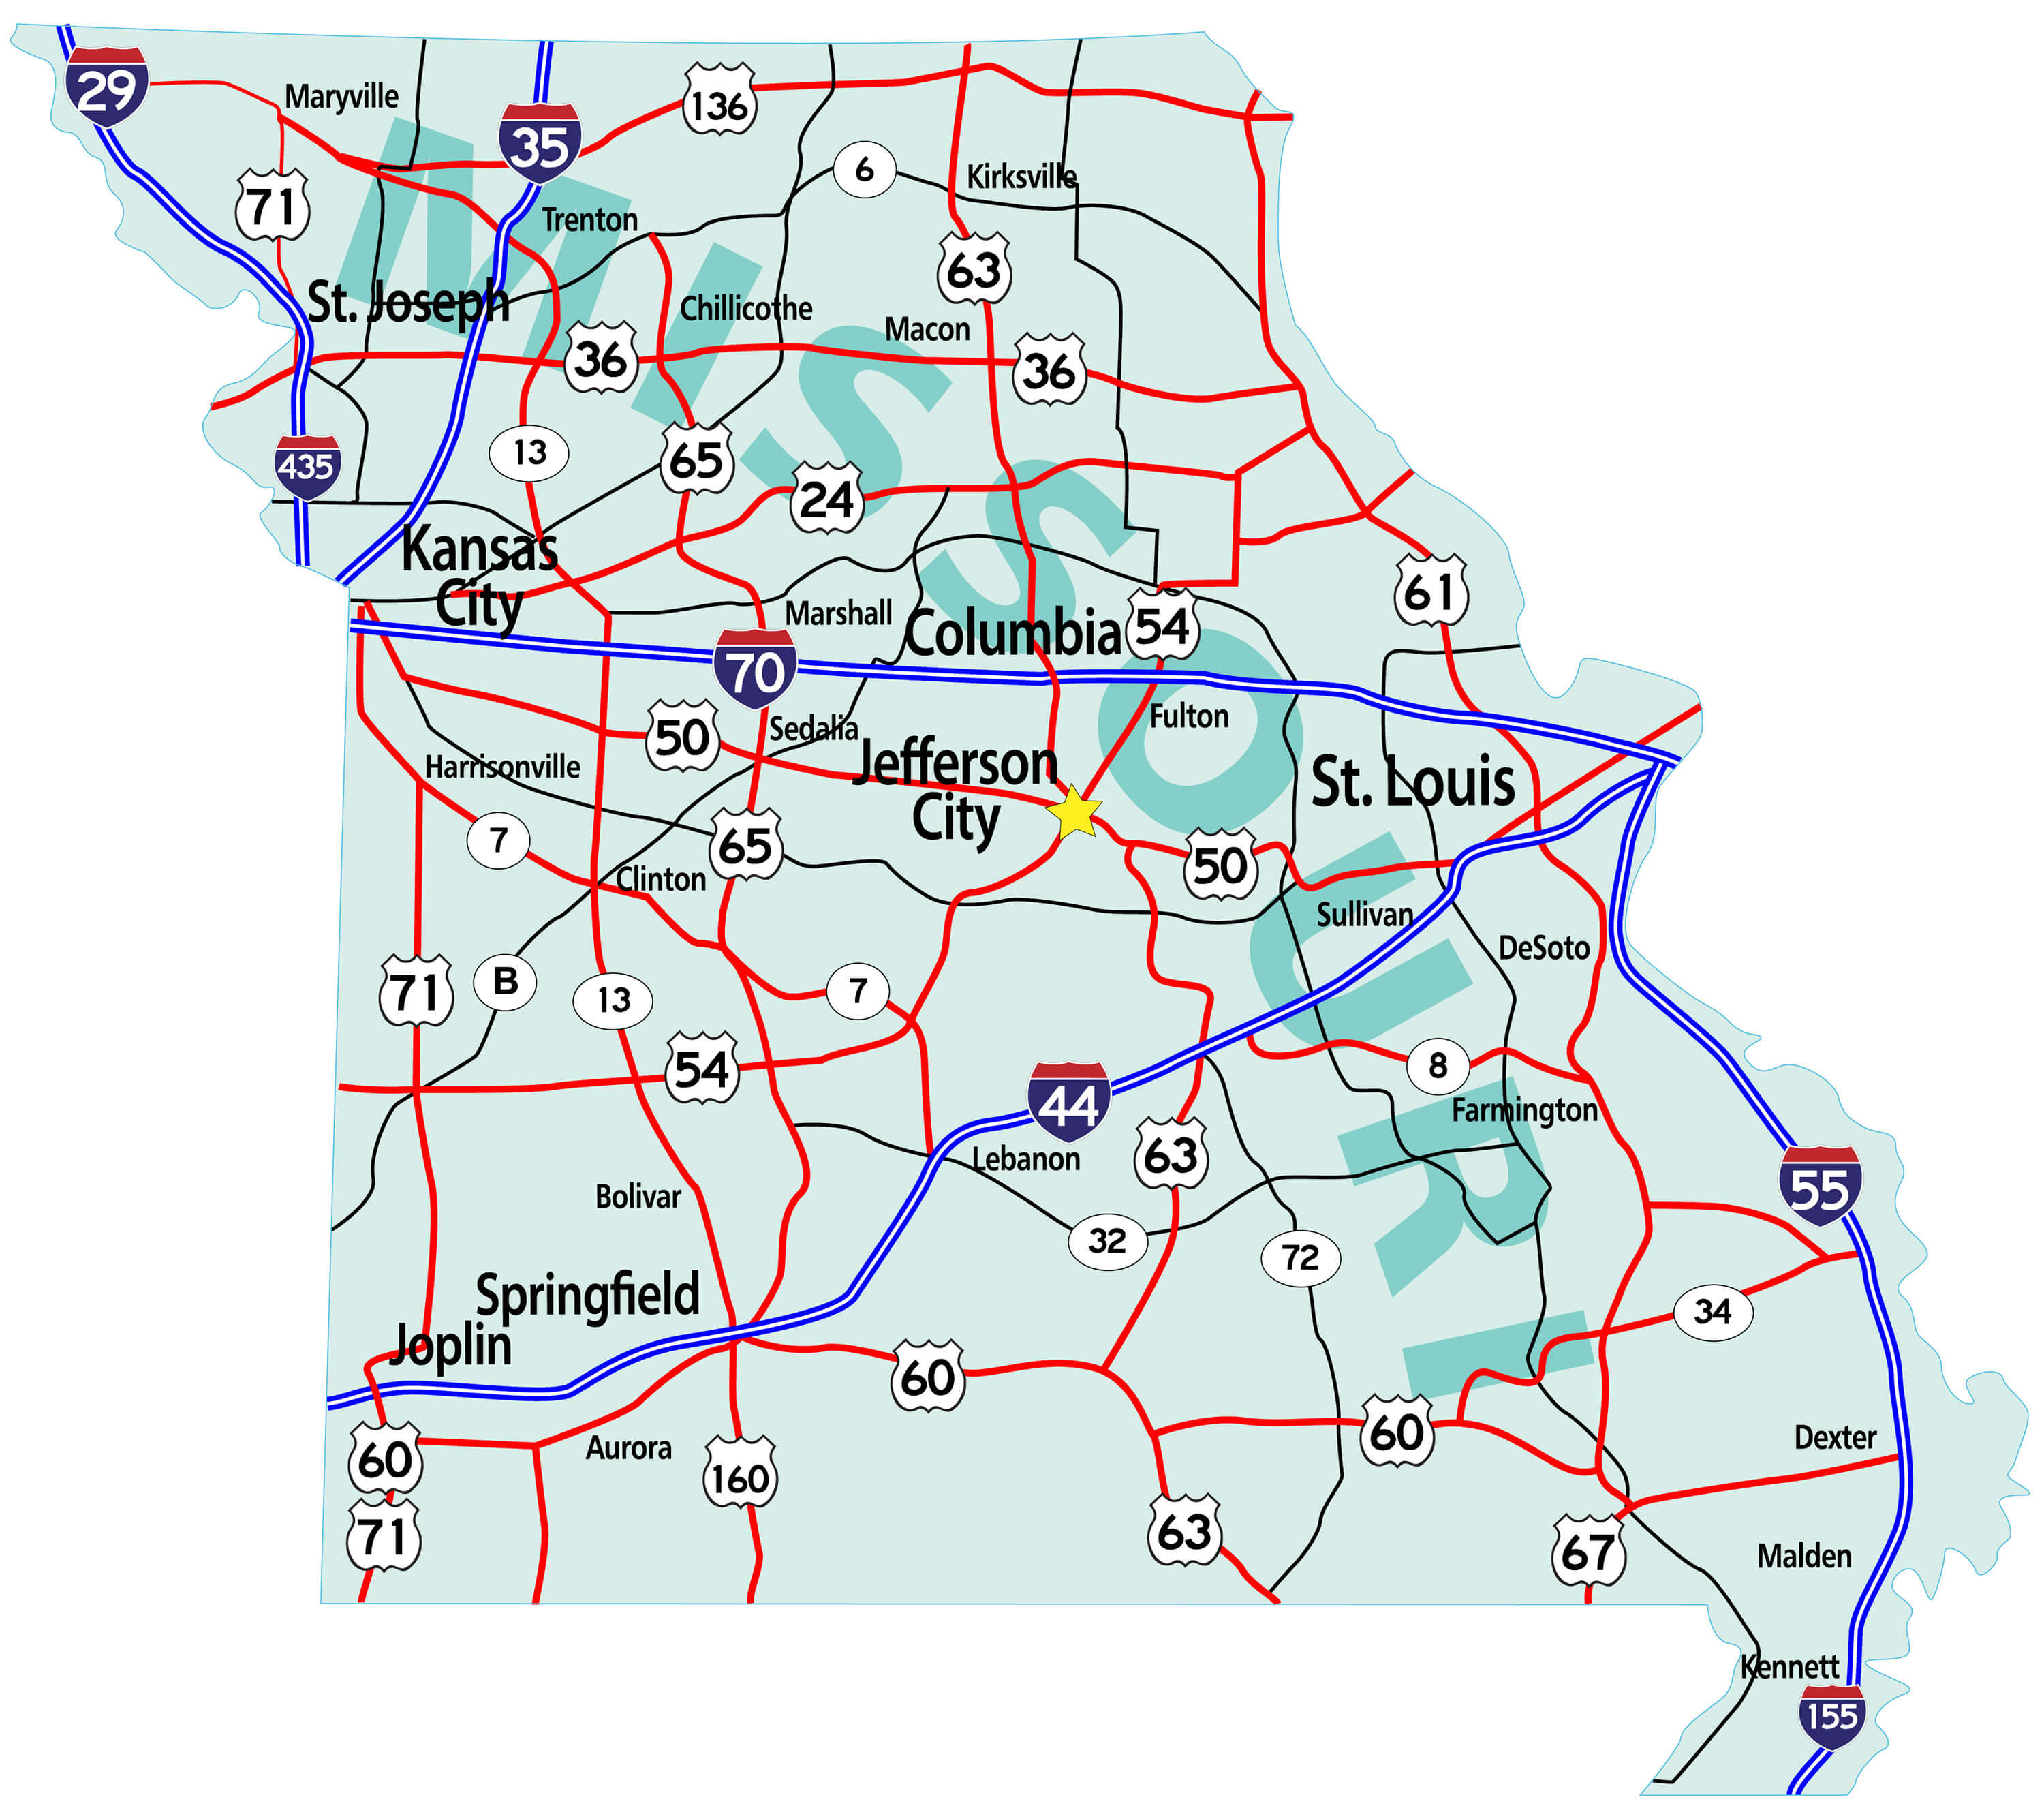 Road Map Of Missouri With Cities - vrogue.co